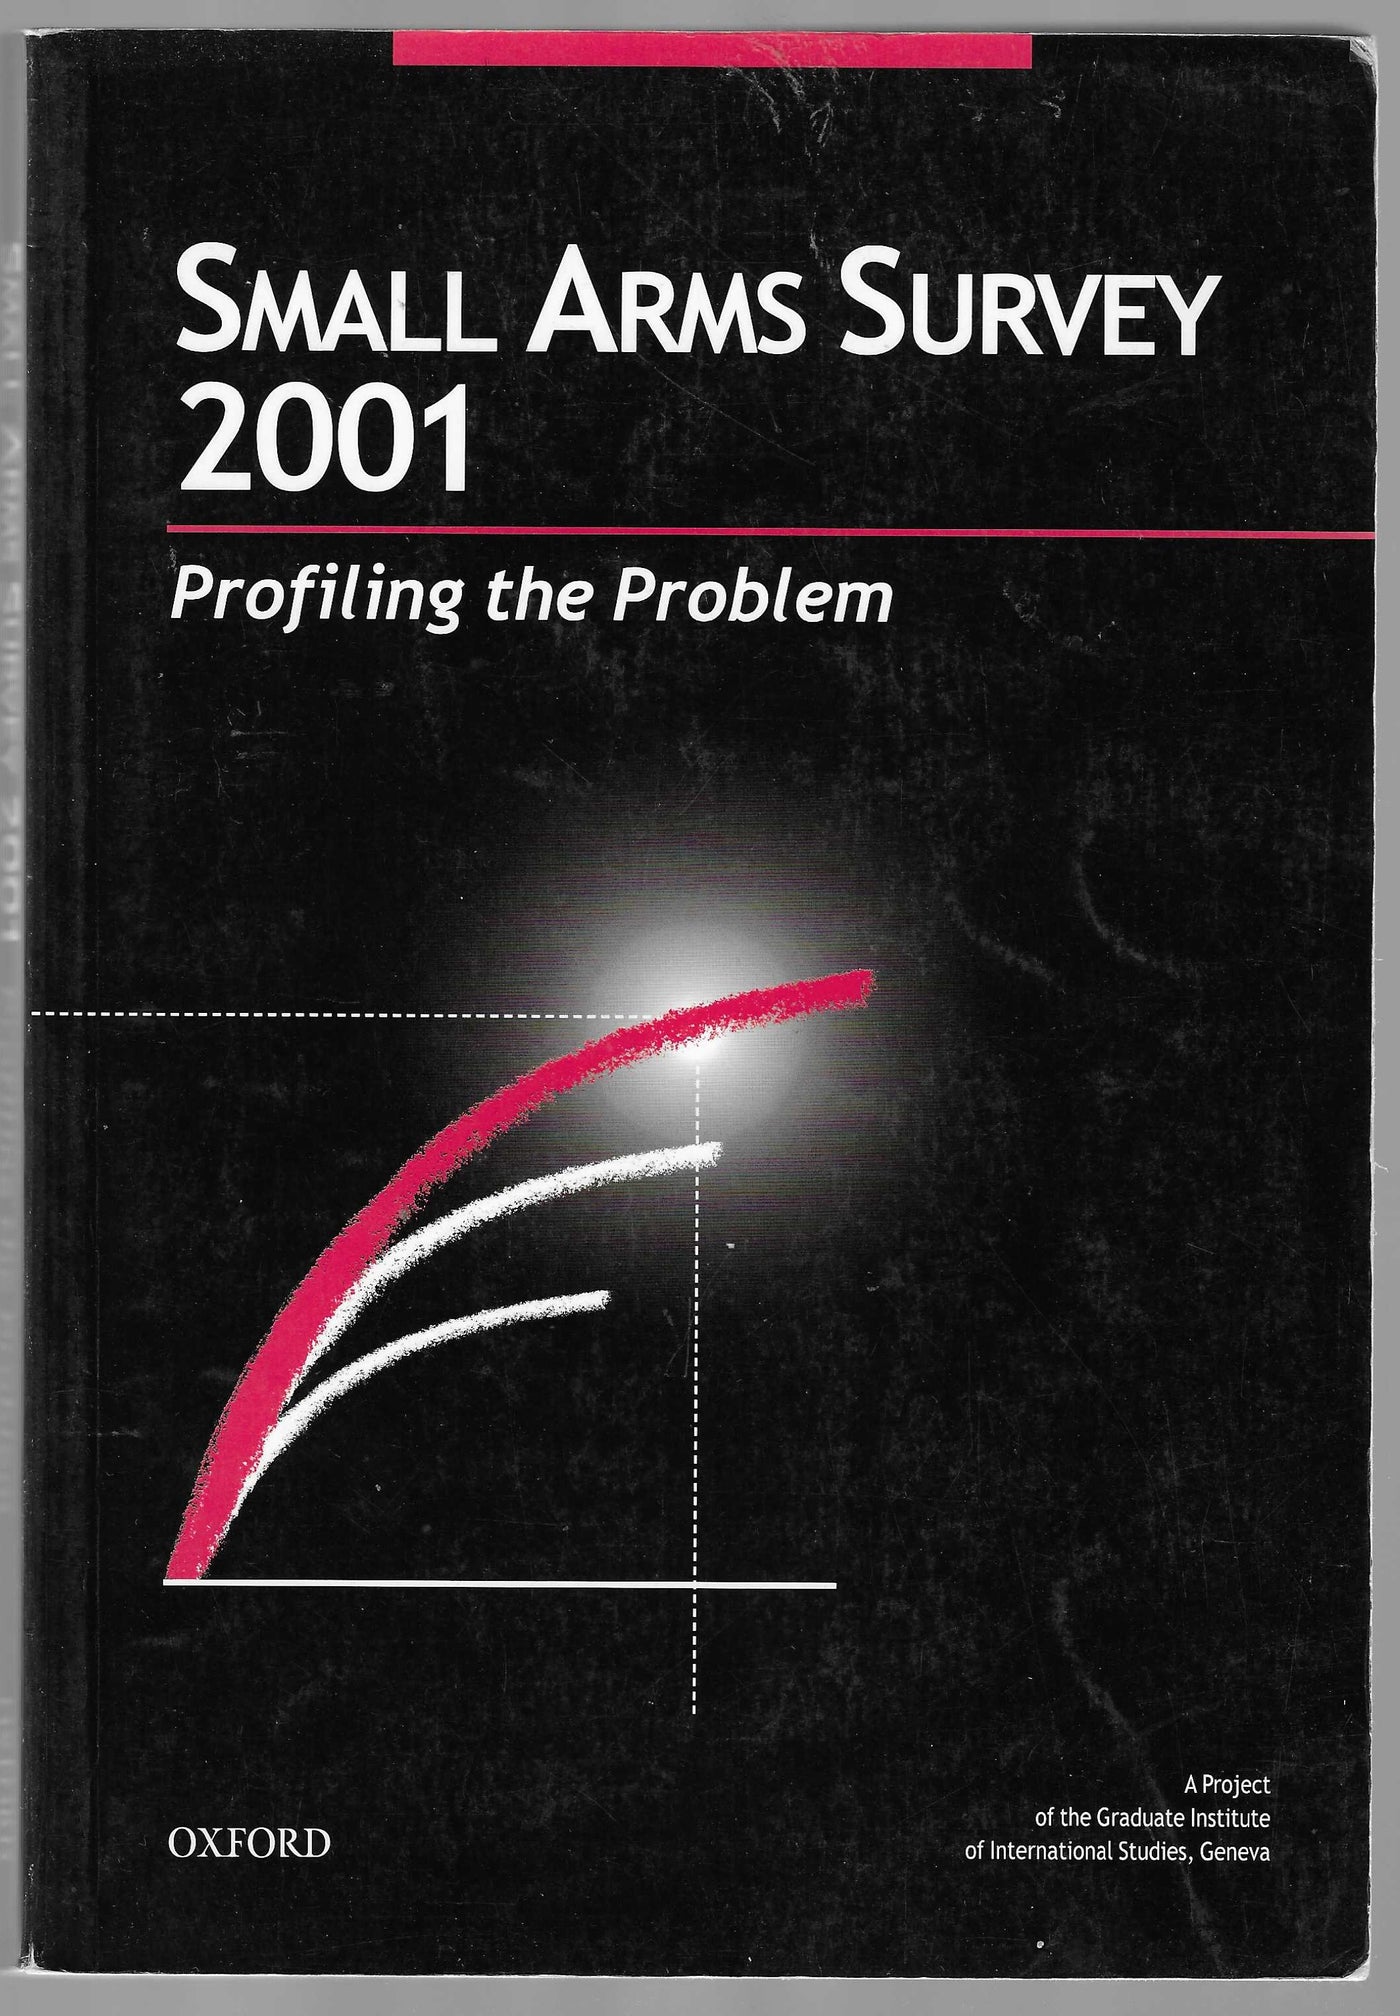 Small Arms Survey 2001: Profiling the Problem